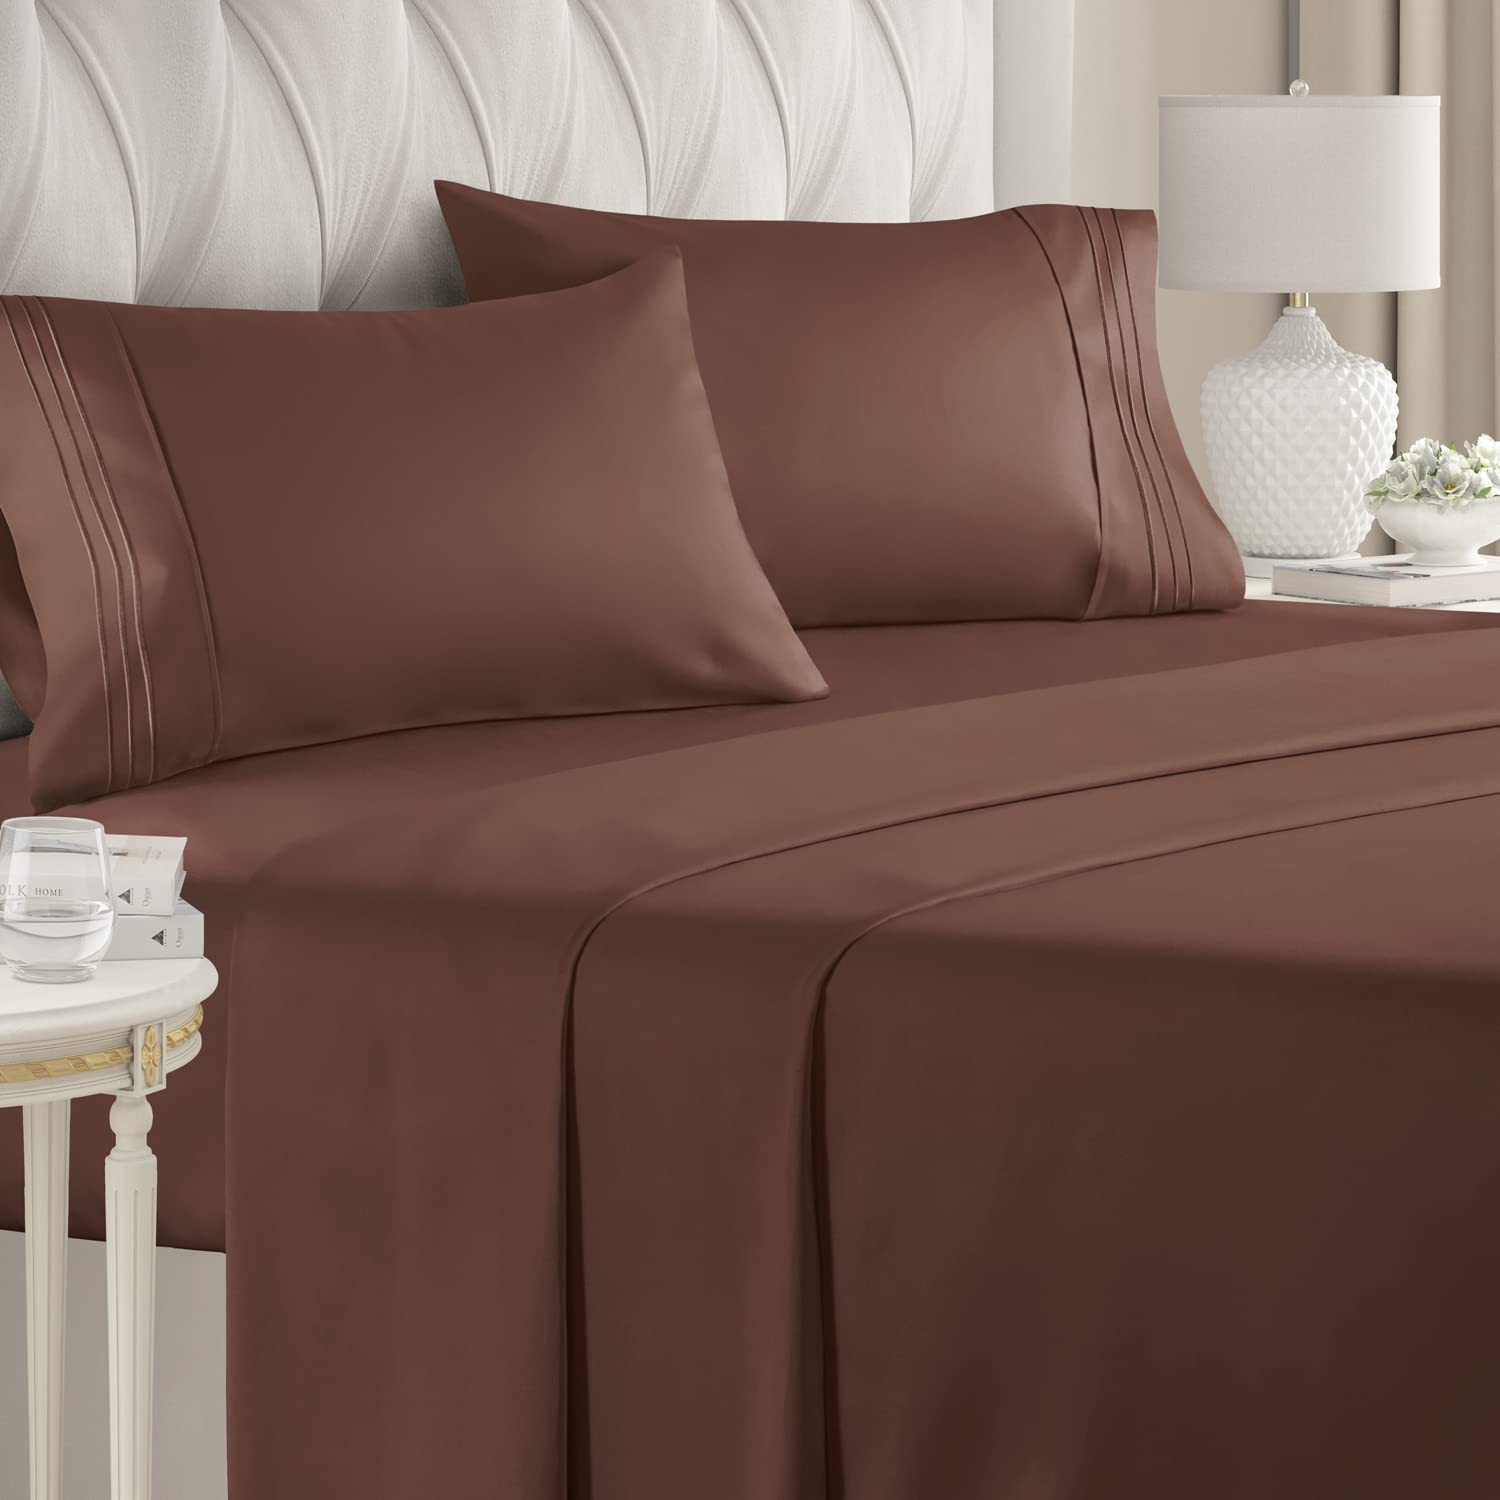 Buy 1200 Thread Count Chocolate Sheet Set Egyptian Cotton at EgyptianHomeLinens.com